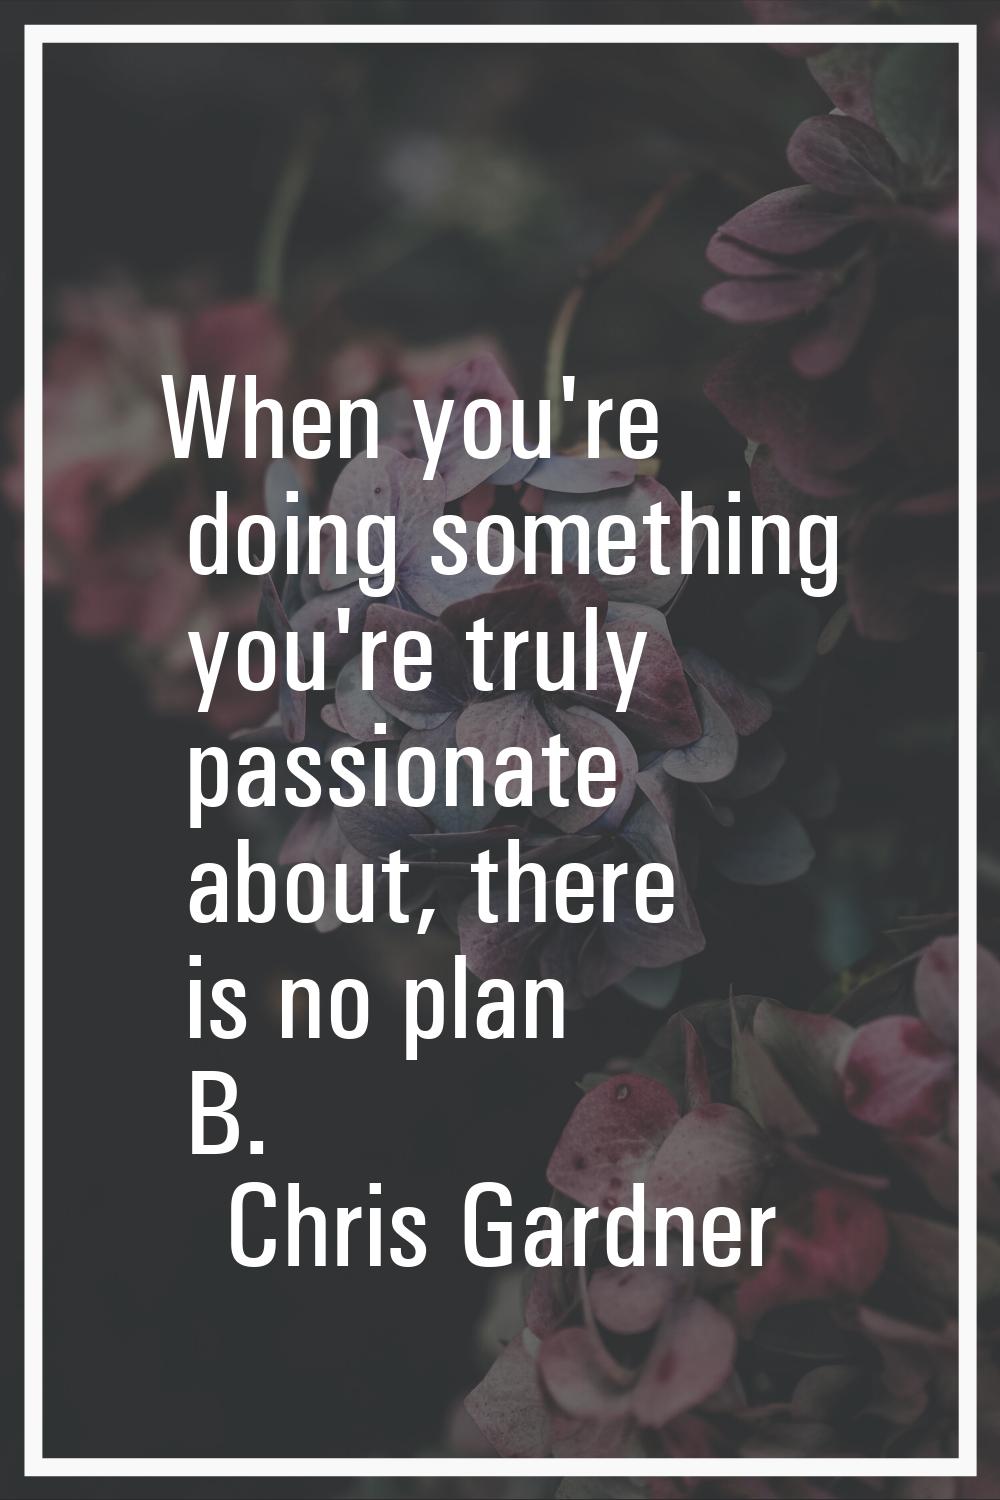 When you're doing something you're truly passionate about, there is no plan B.